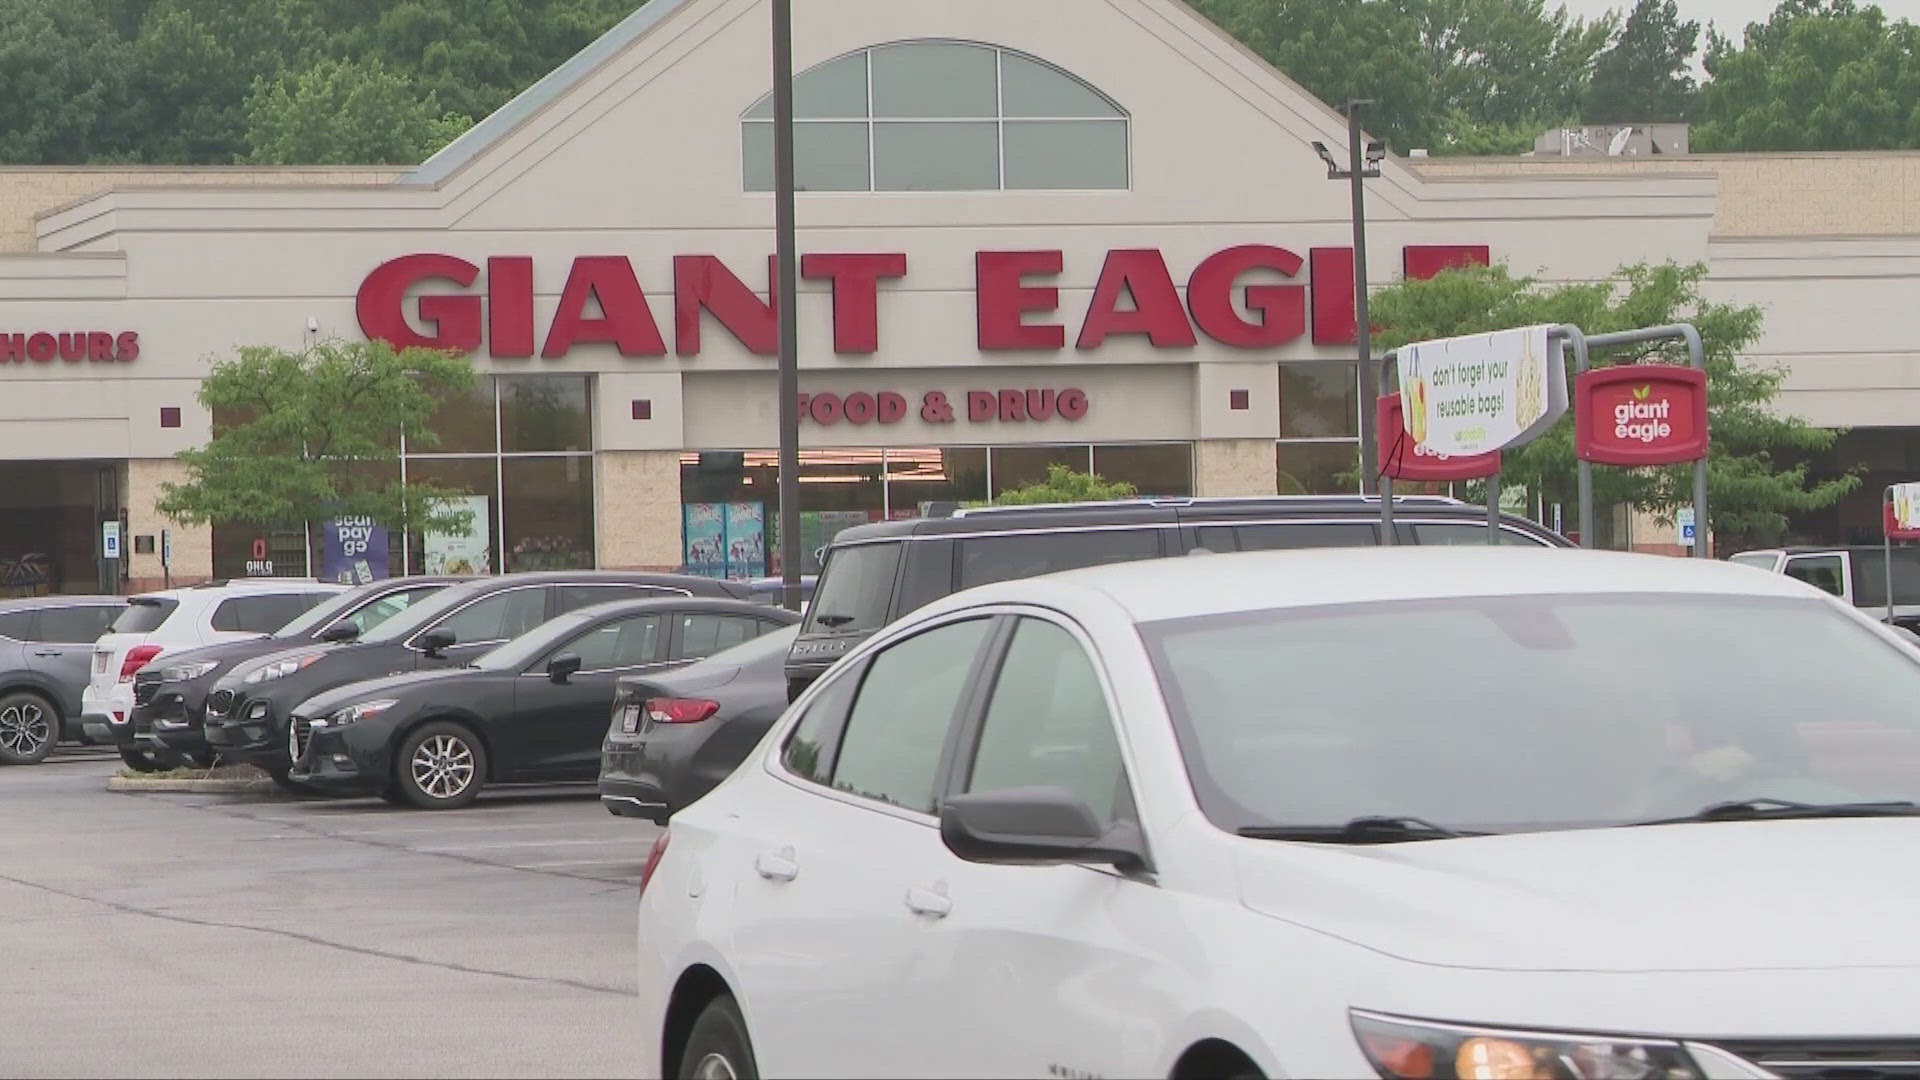 Giant Eagle says the first wave of Deals for Days will run from May 30 through July 31 with savings on items like burgers, hot dogs, fruits and vegetables.